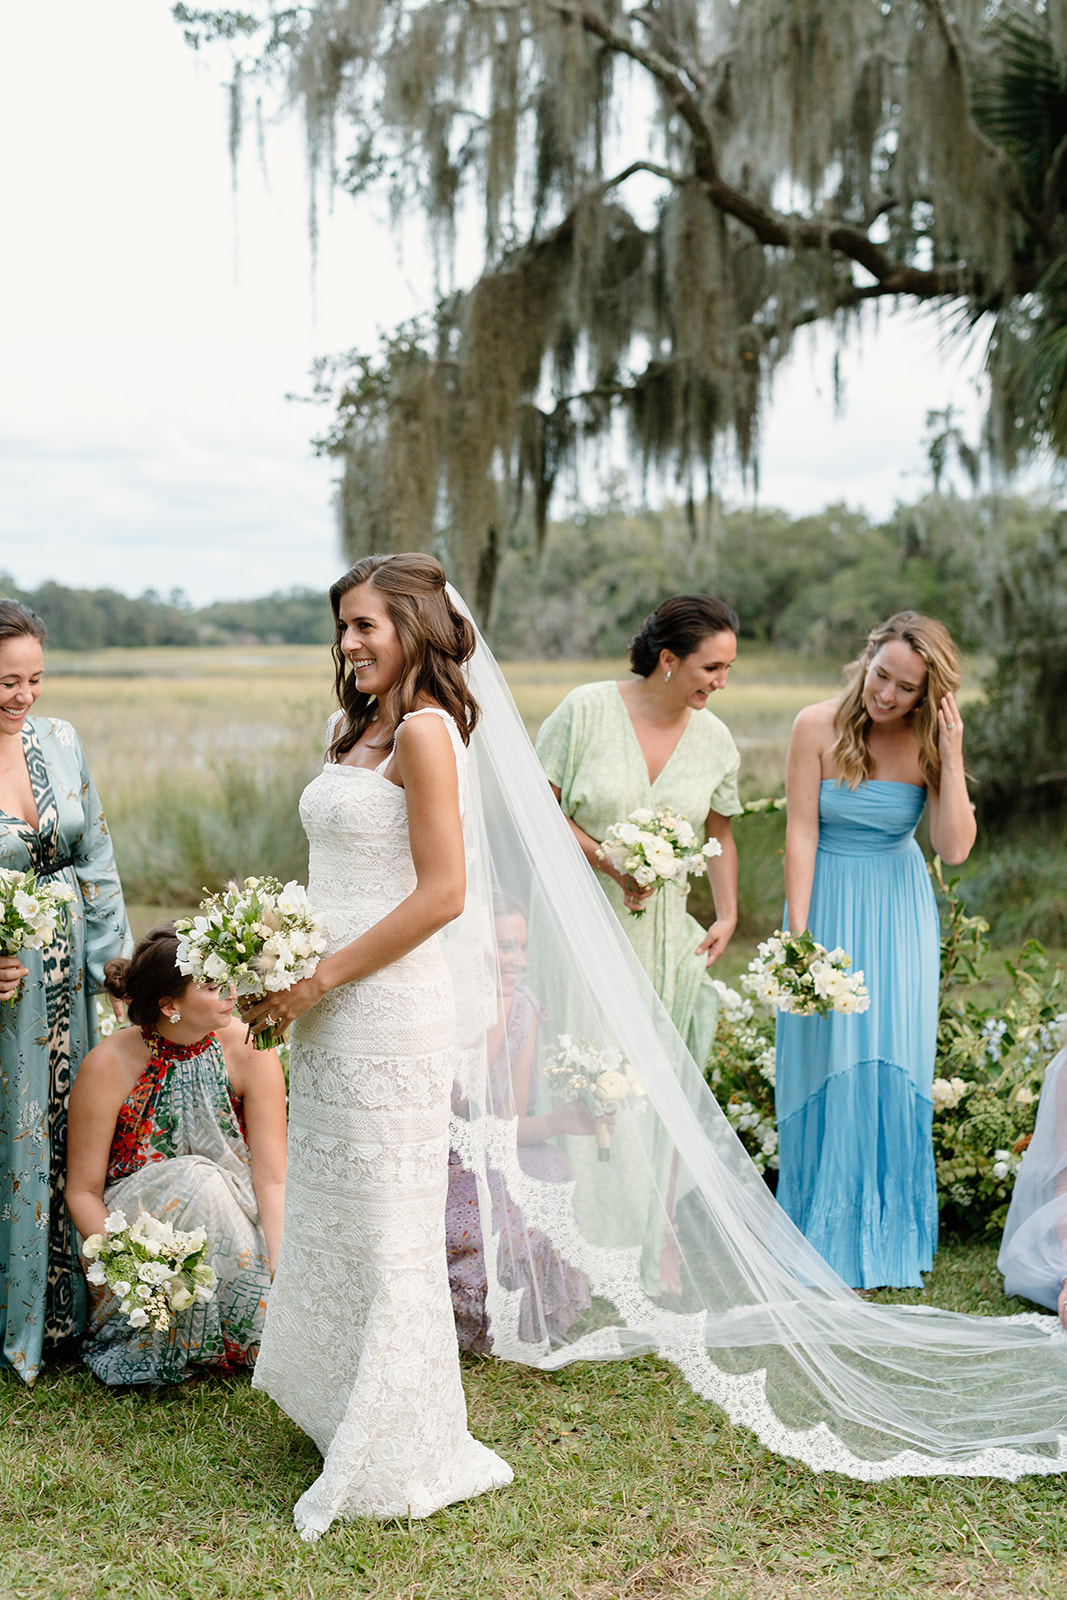 Unexpected Wedding Party Woes and How to Address Them Quickly